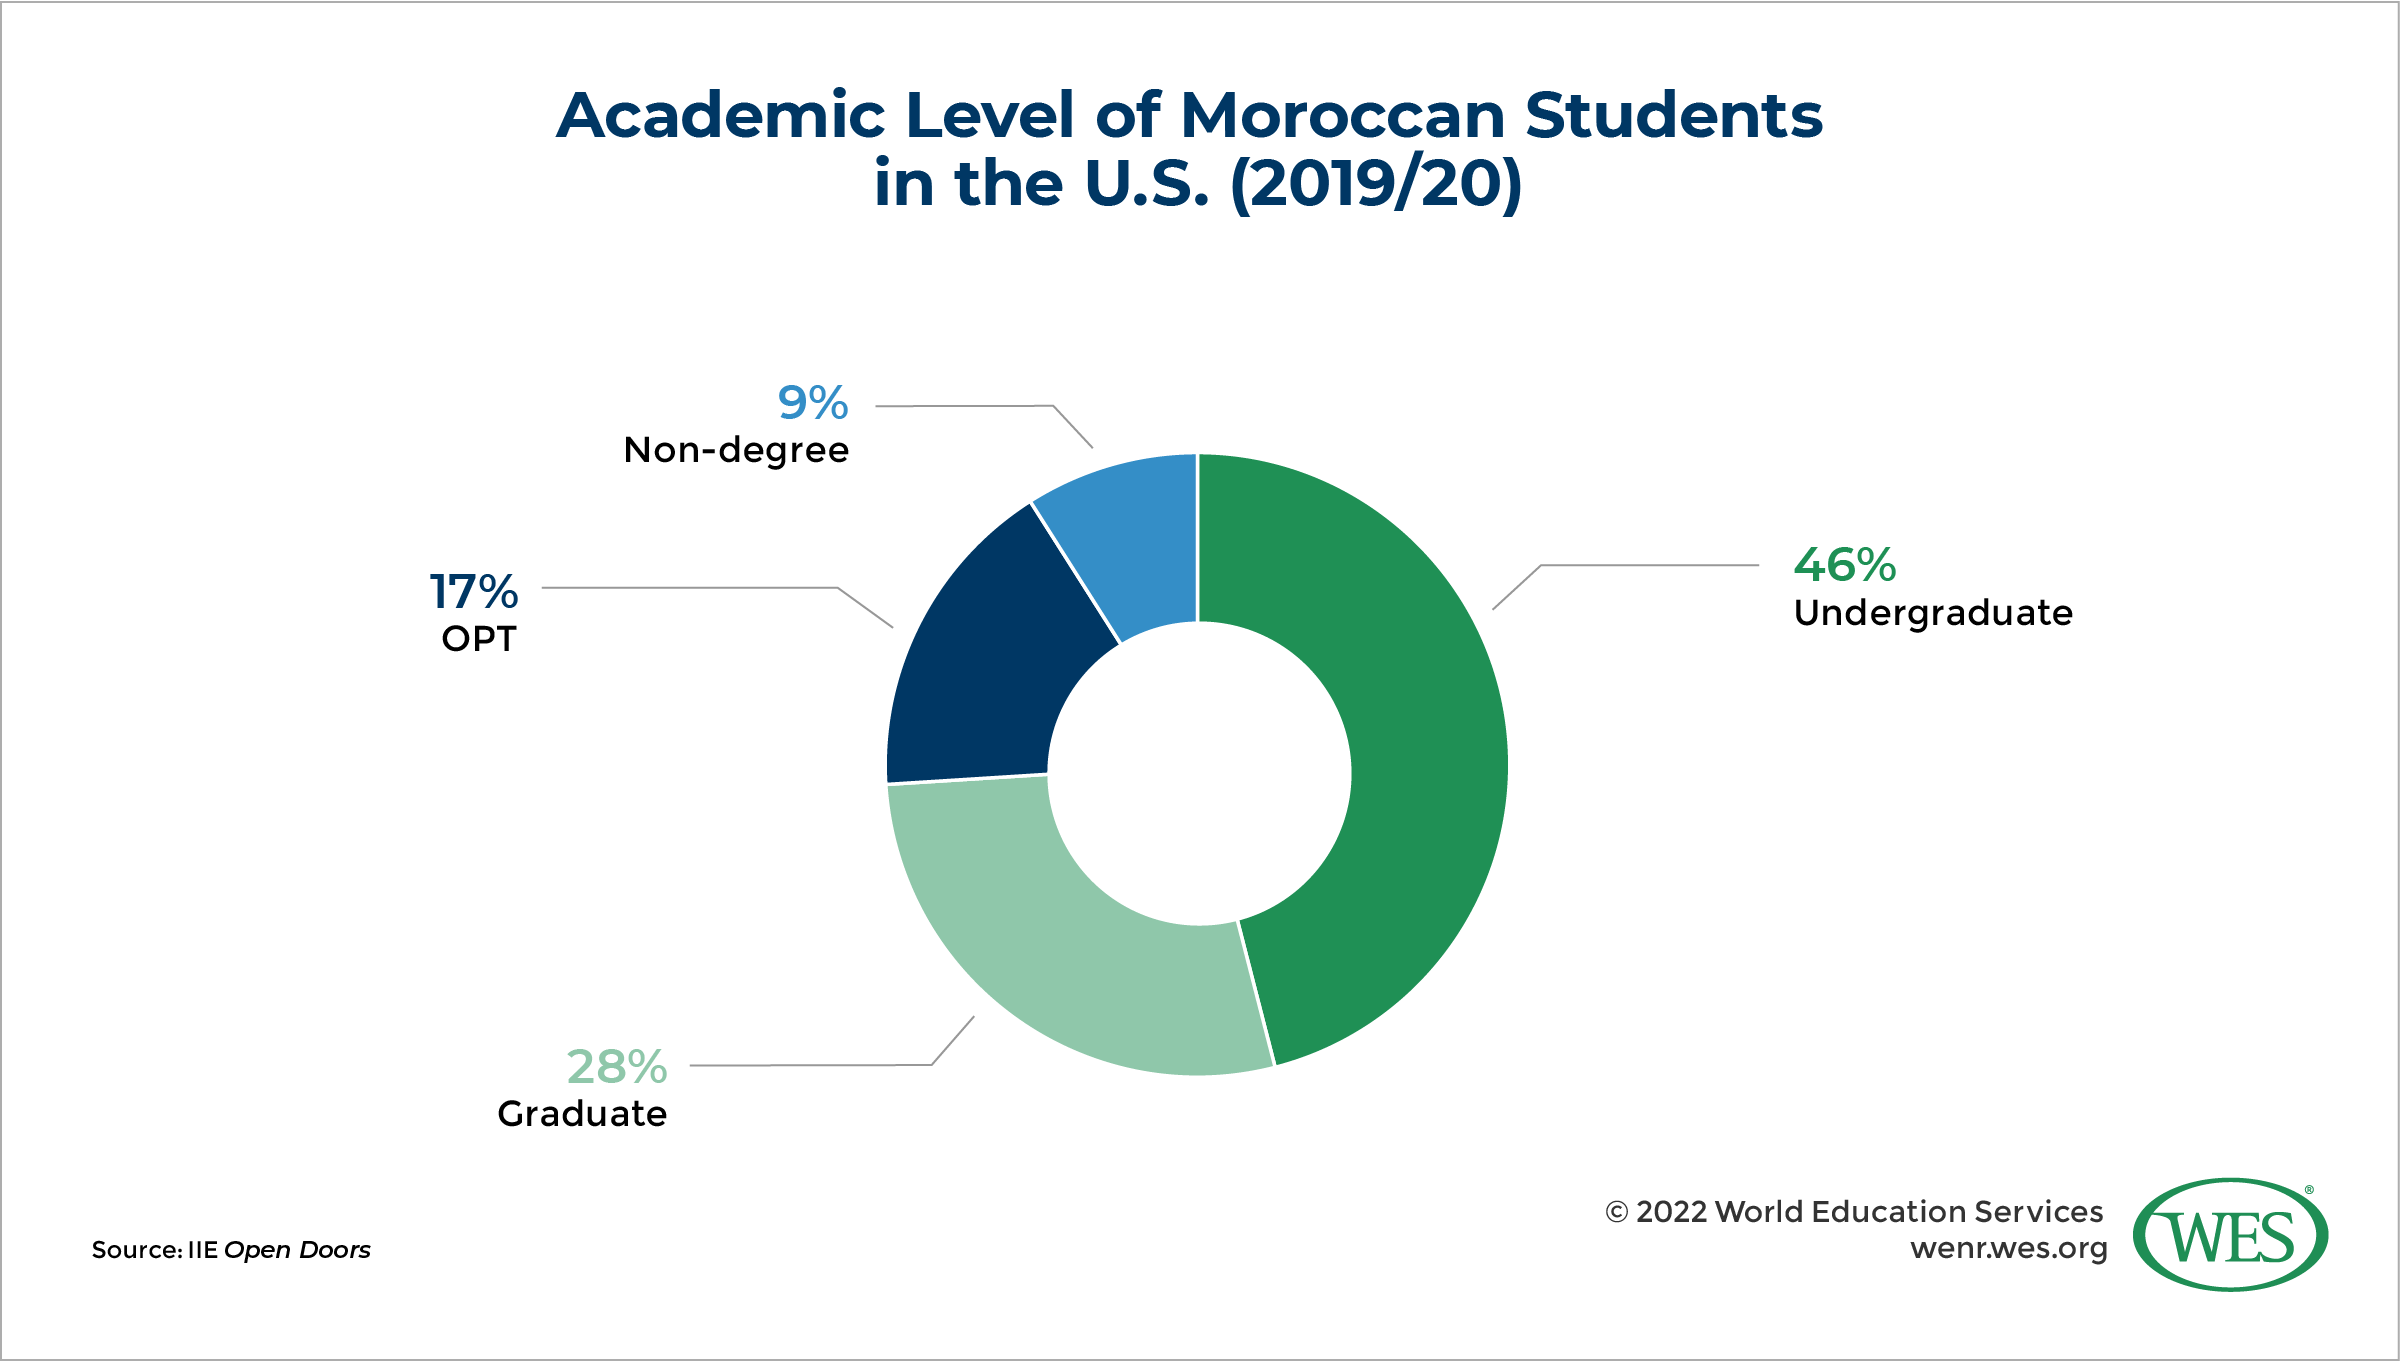 Pie chart showing the academic level of Moroccan students in the U.S. in 2019/20. 